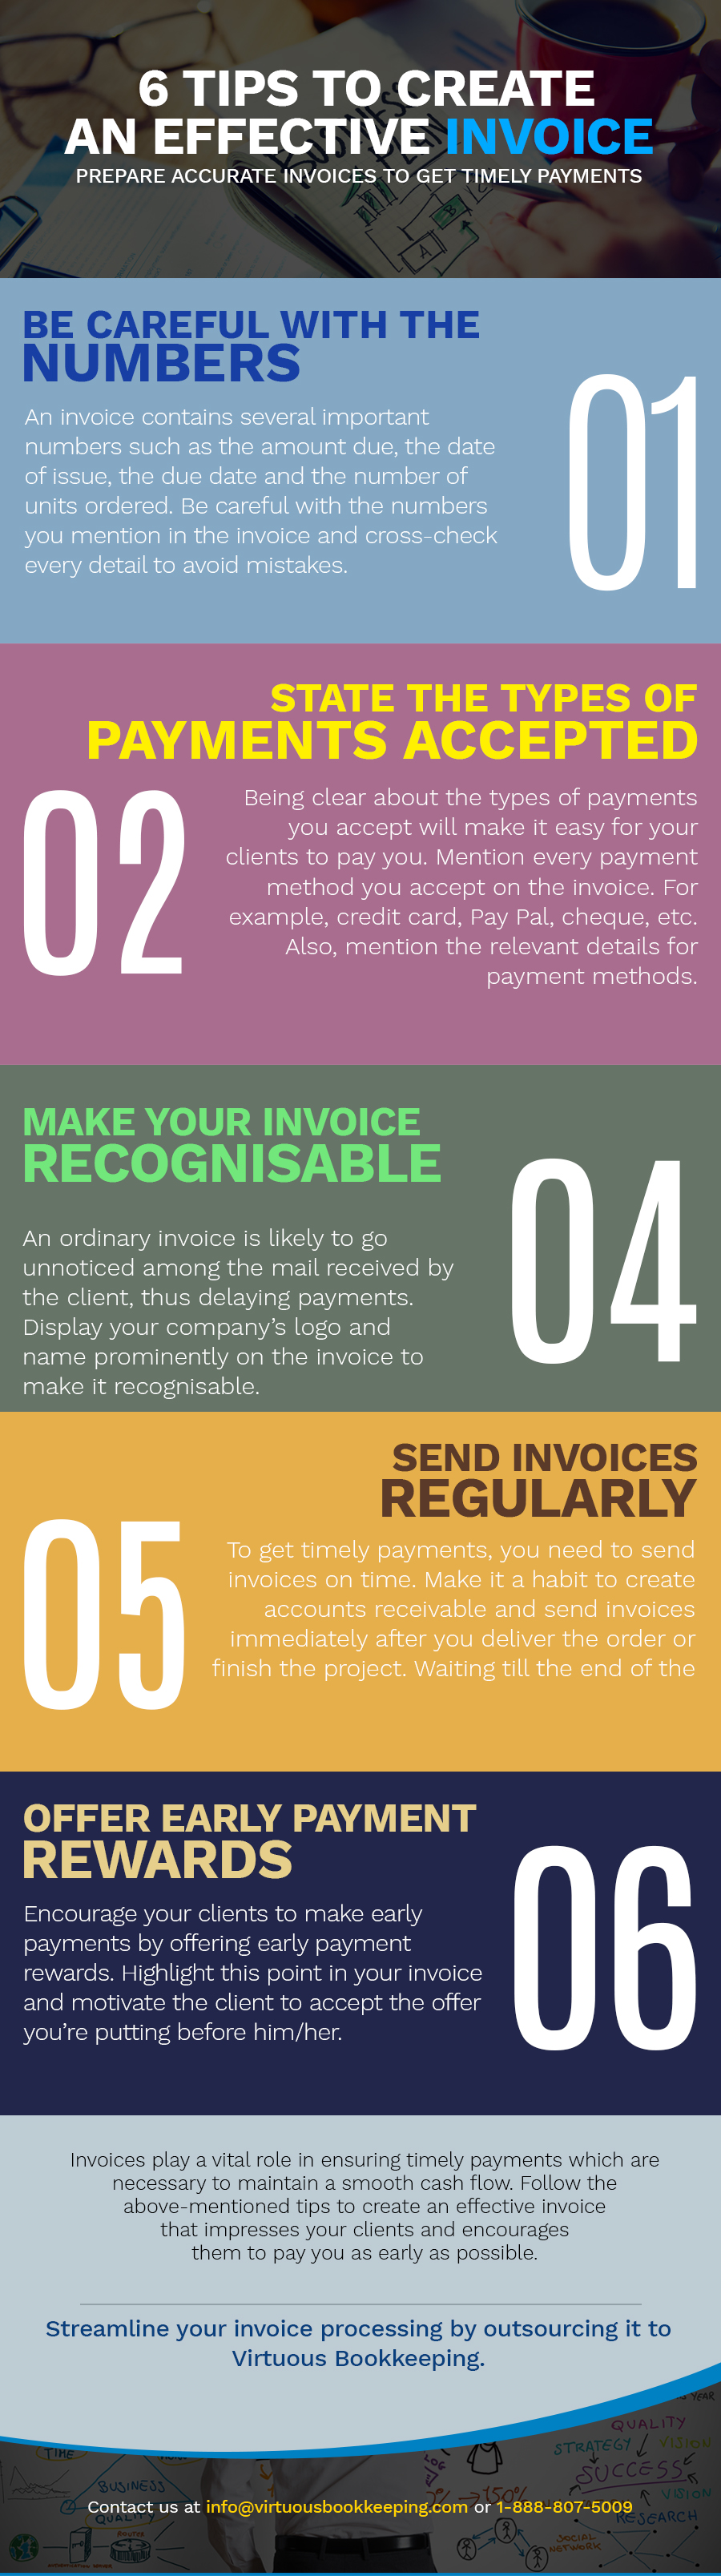 6 Tips to Create an Effective Invoice 